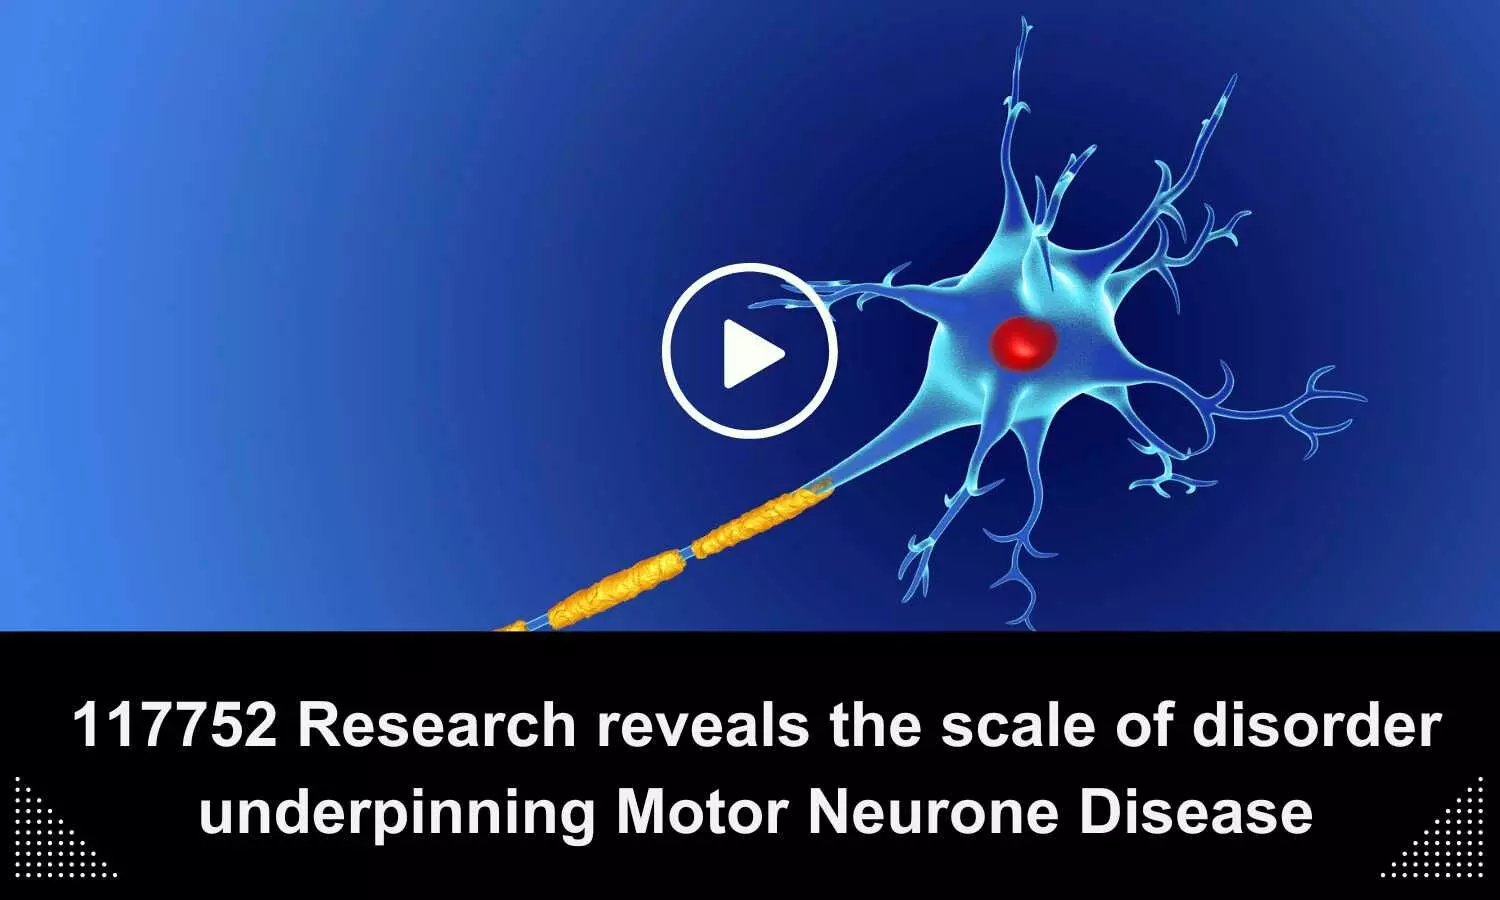 Research reveals the scale of disorder underpinning Motor Neurone Disease